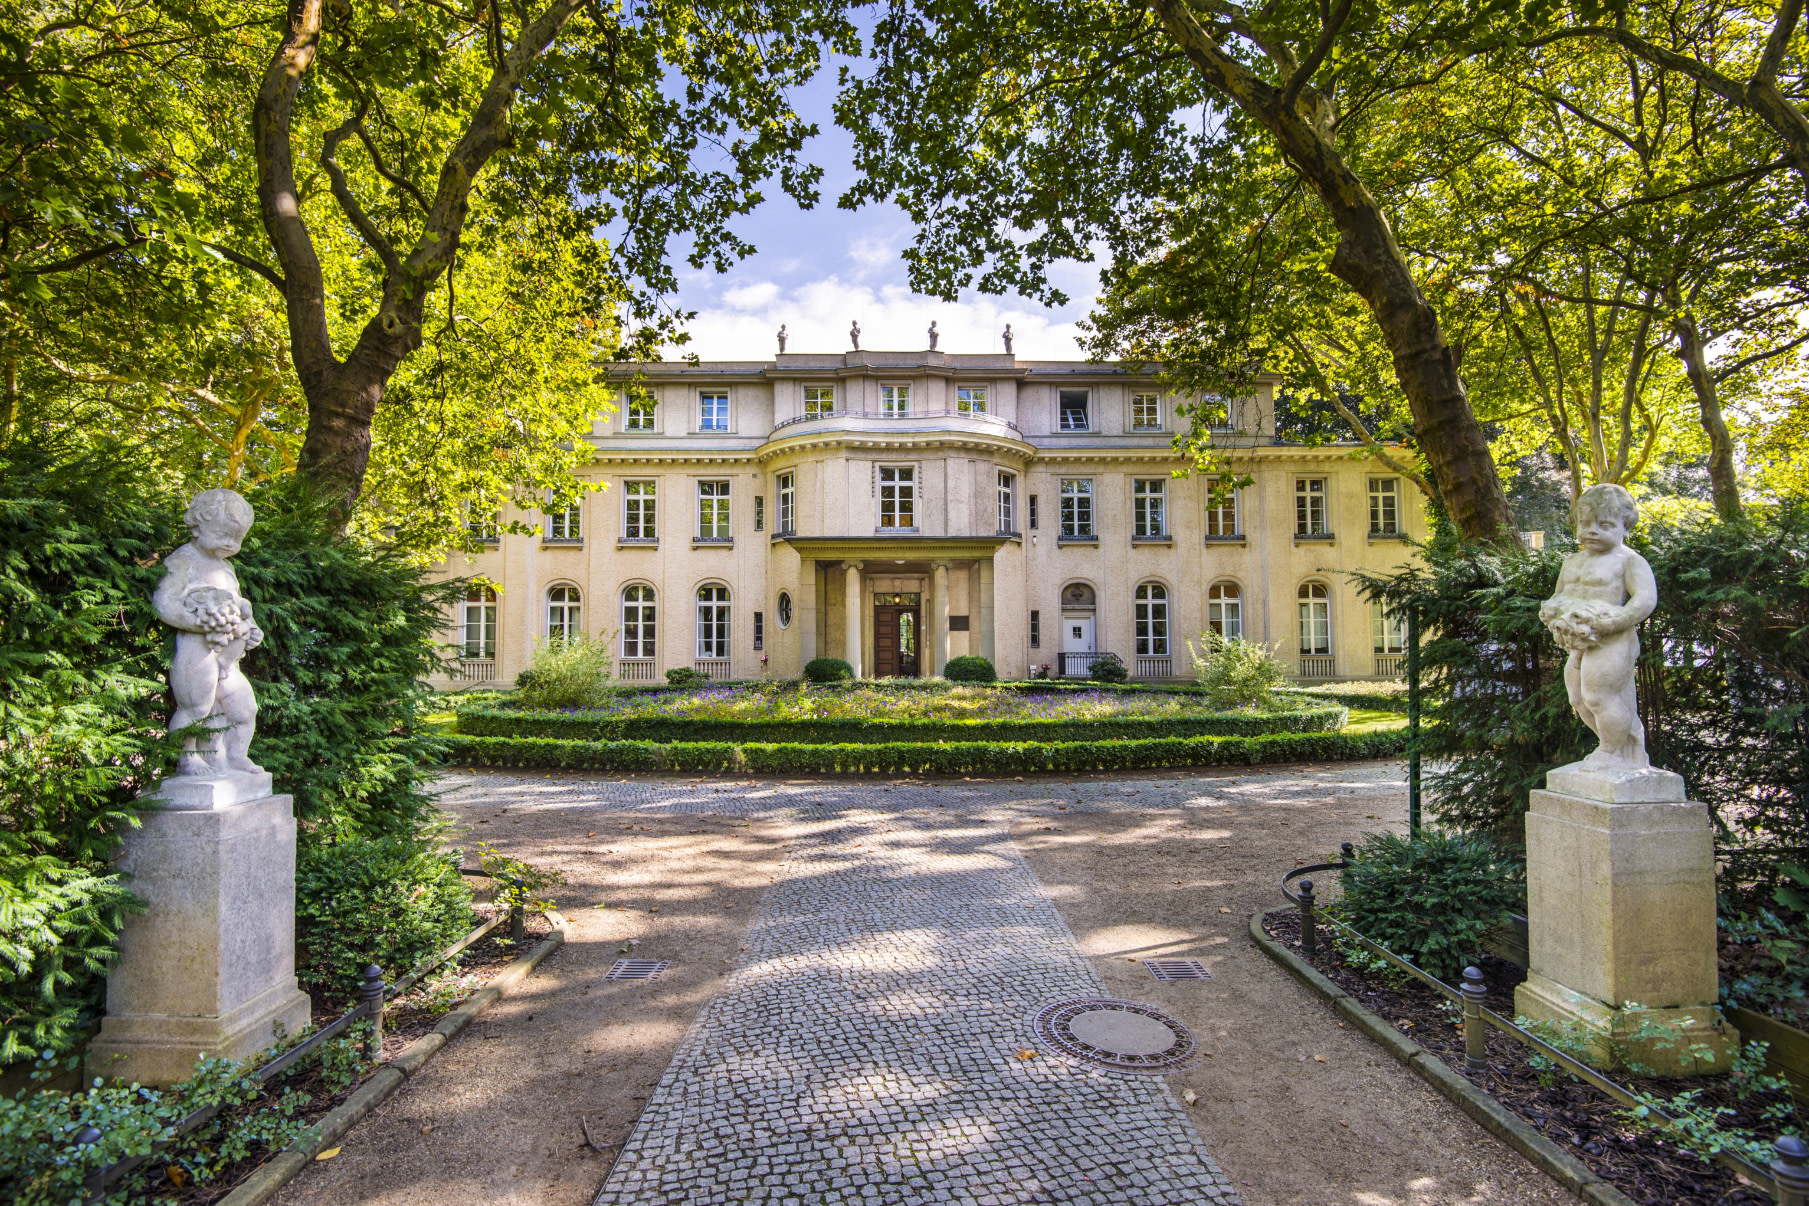 The Wannsee House in Berlin, the most popular city in WJT's destinations (Credit: ESB Professional via Shutterstock)